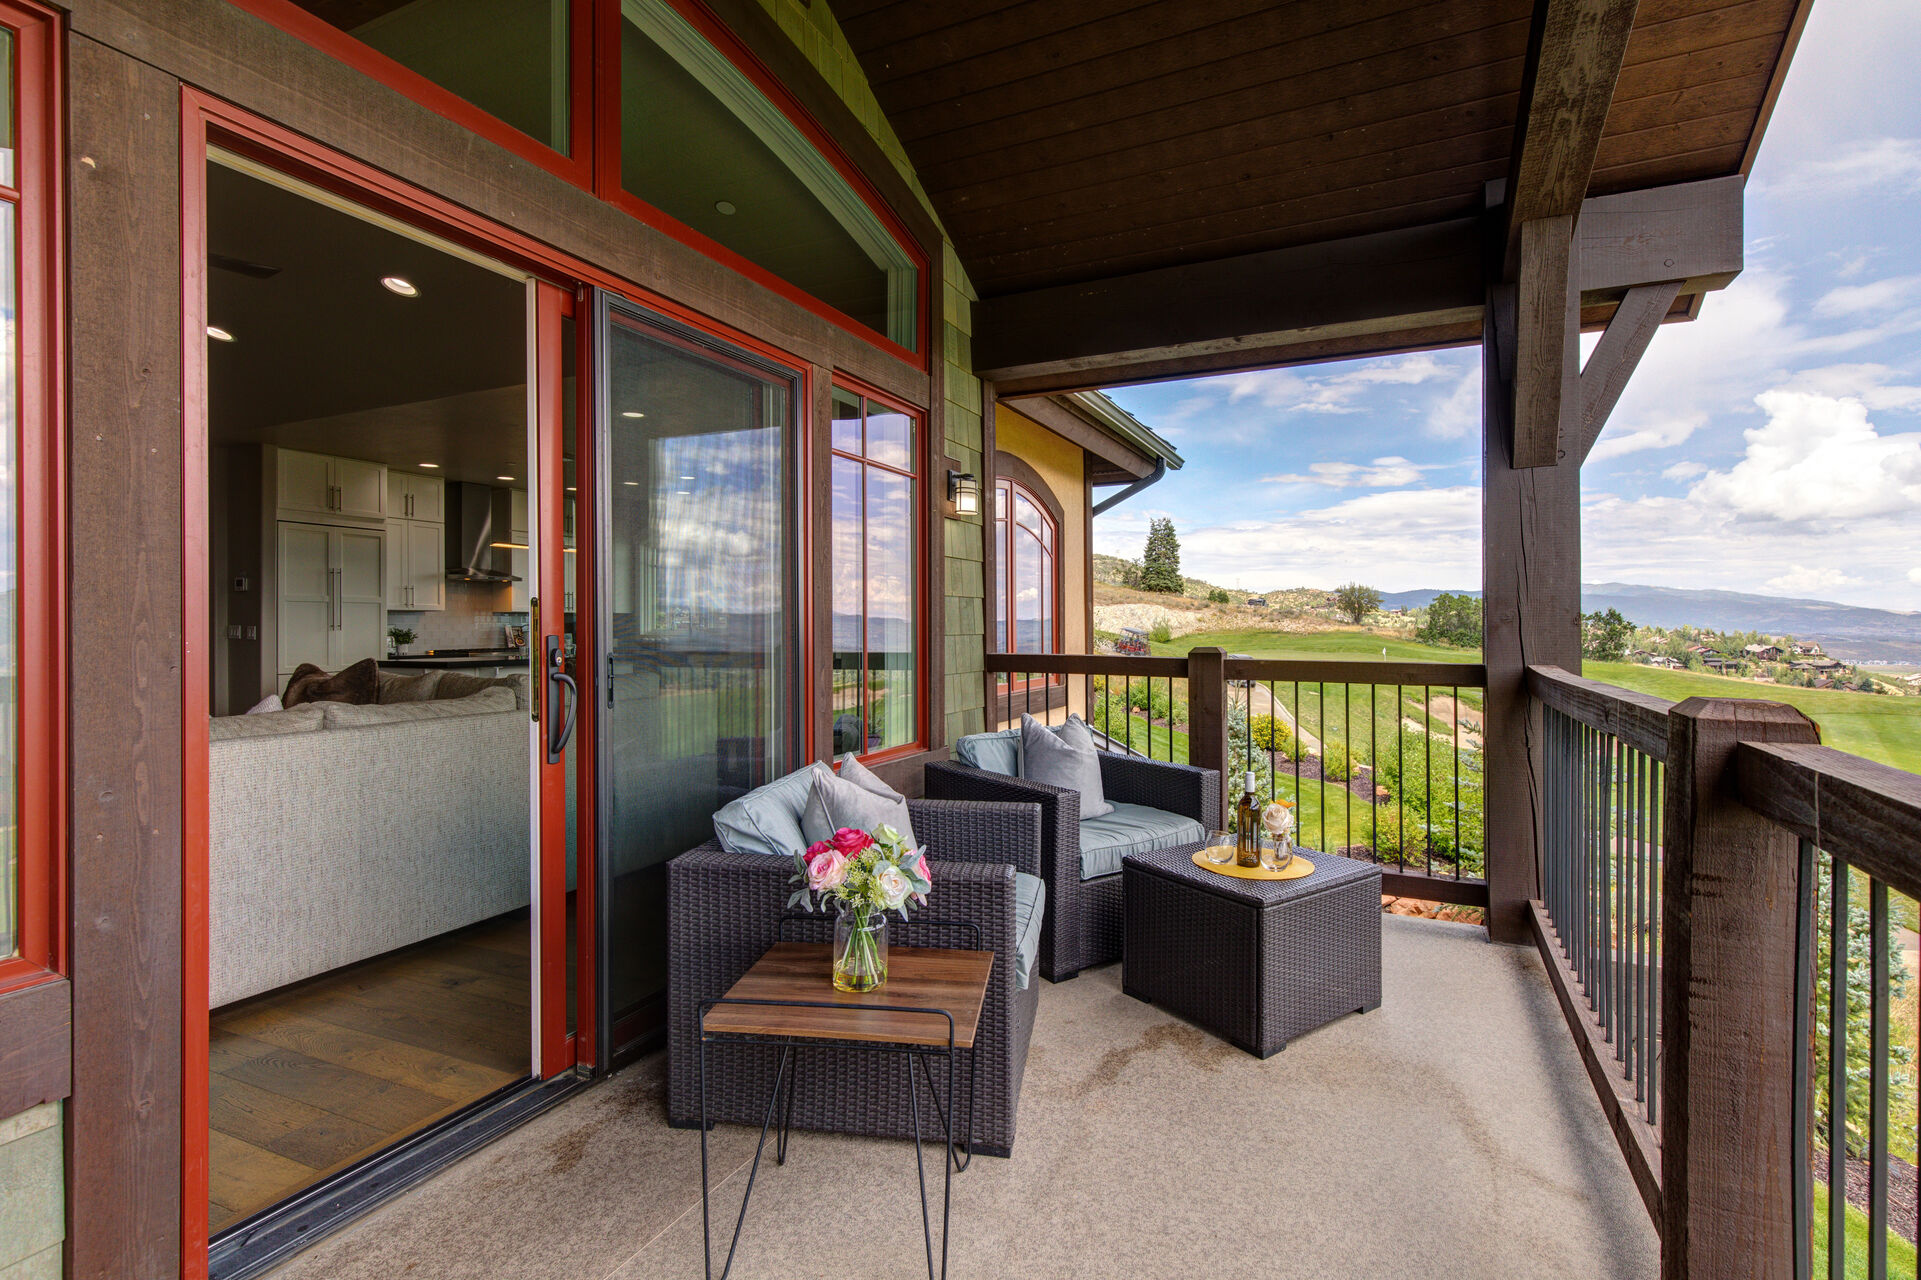 Private Deck overlooking Canyons Golf Course and Canyons resort with BBQ grill and outdoor furnishings